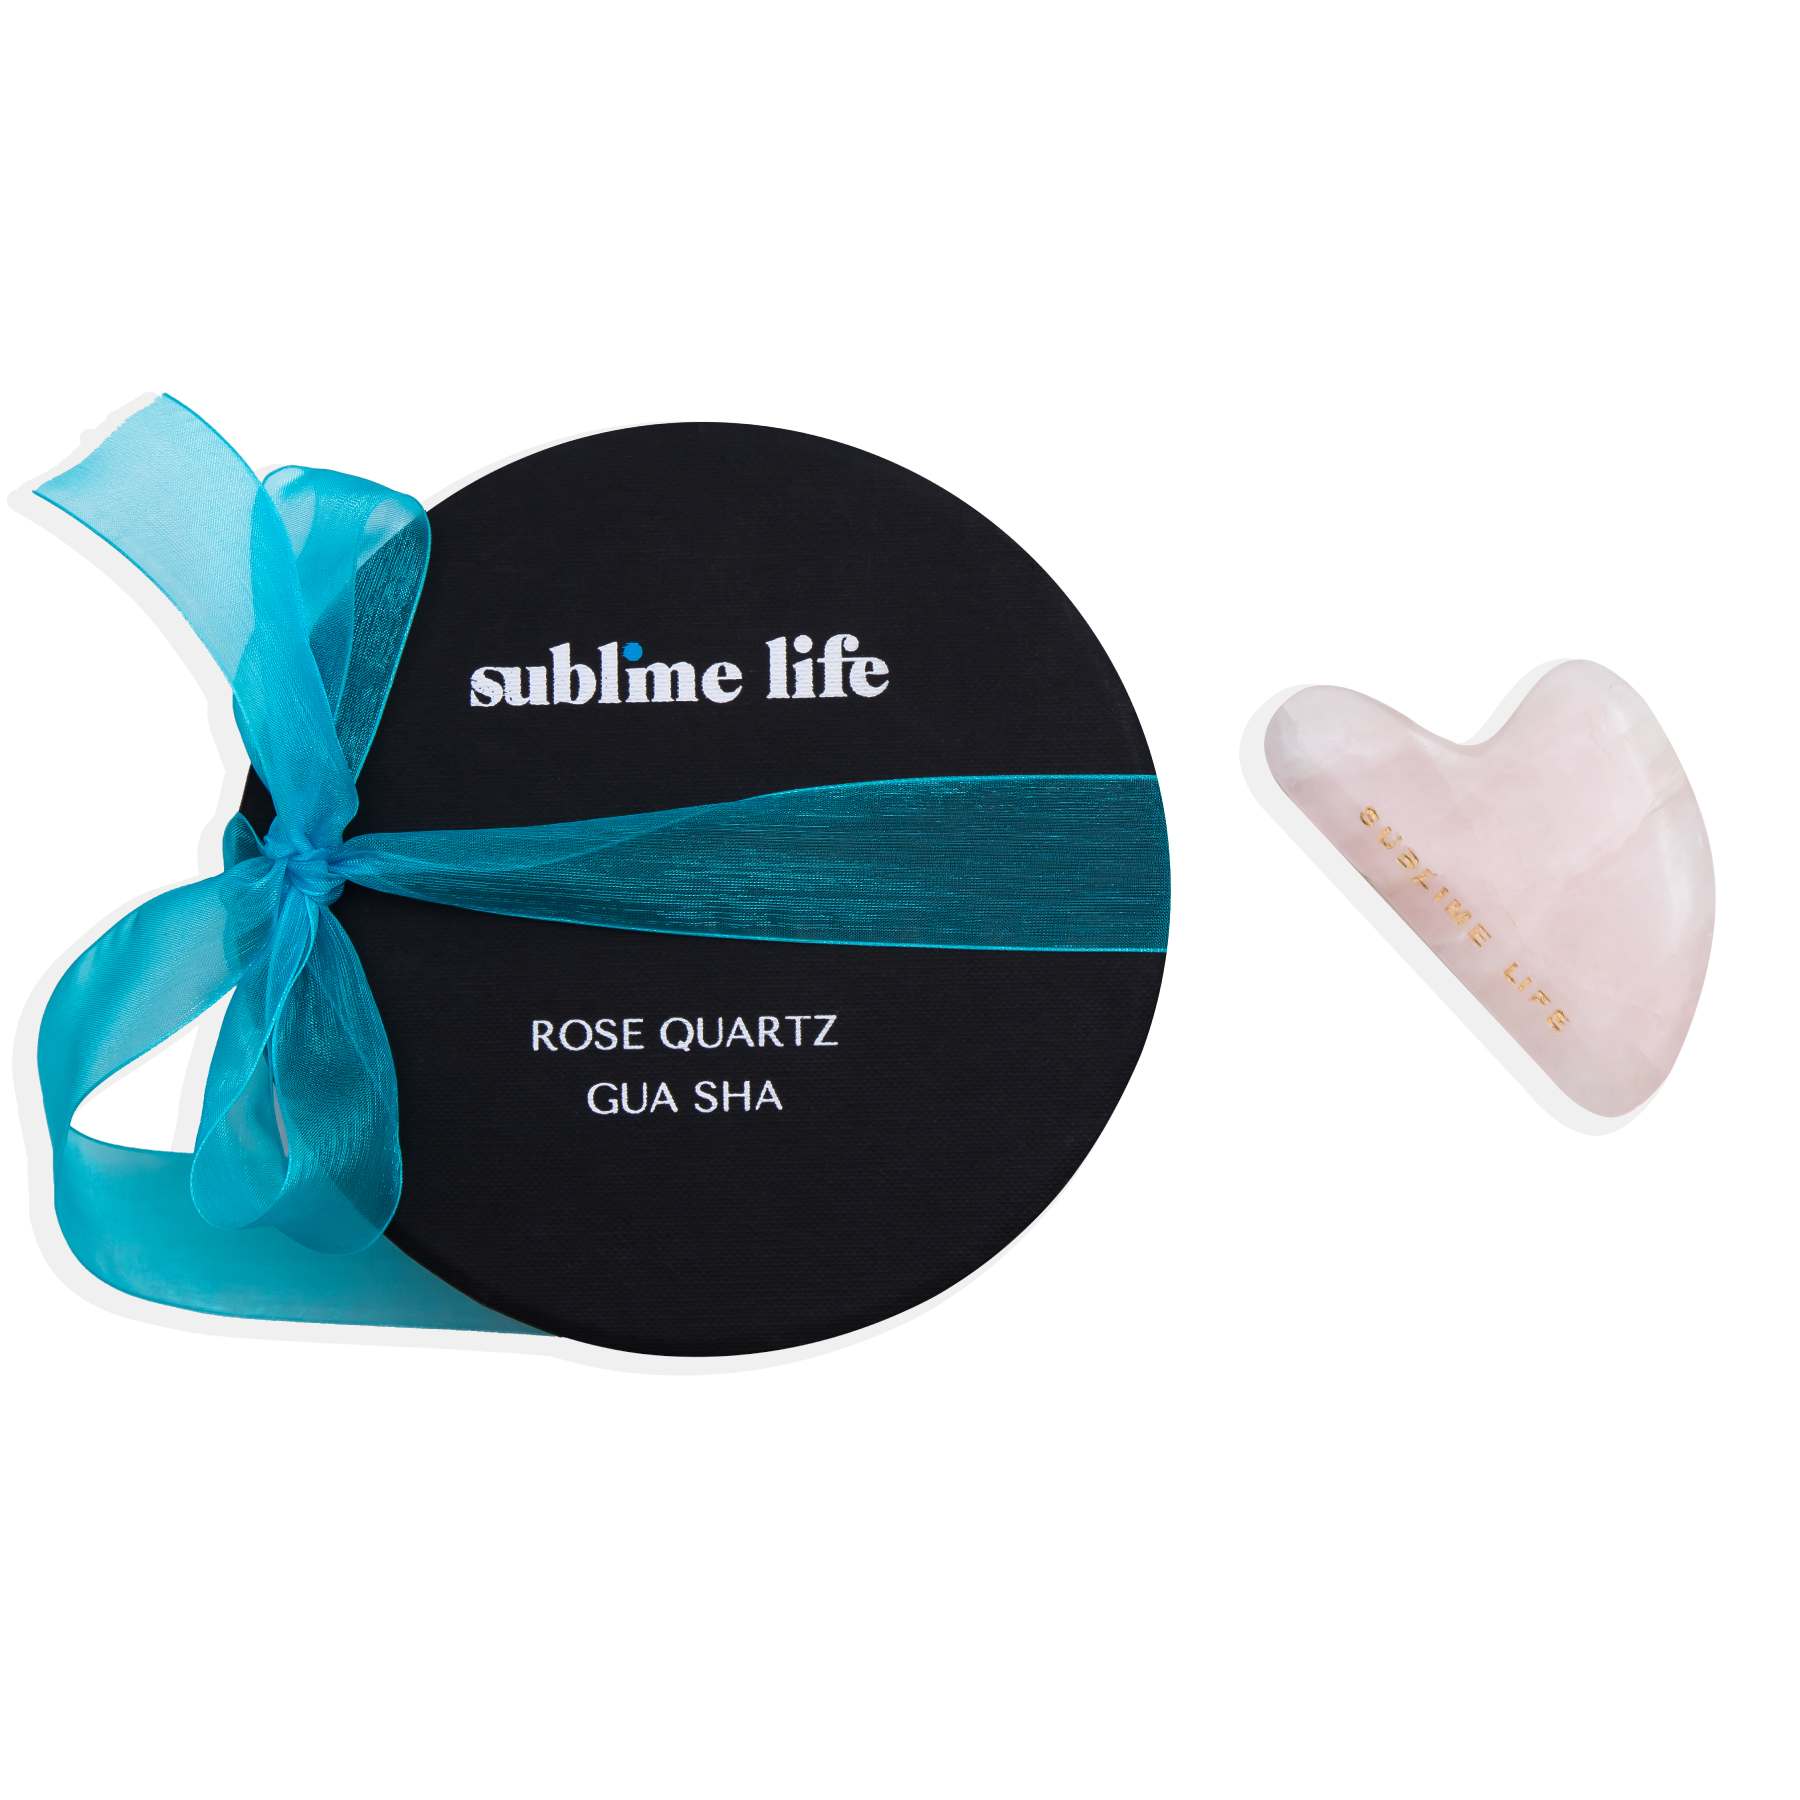 Shop Rose Quartz Gua Sha on SublimeLife.in. Best for reducing puffiness, dark circles, fine lines and pores.